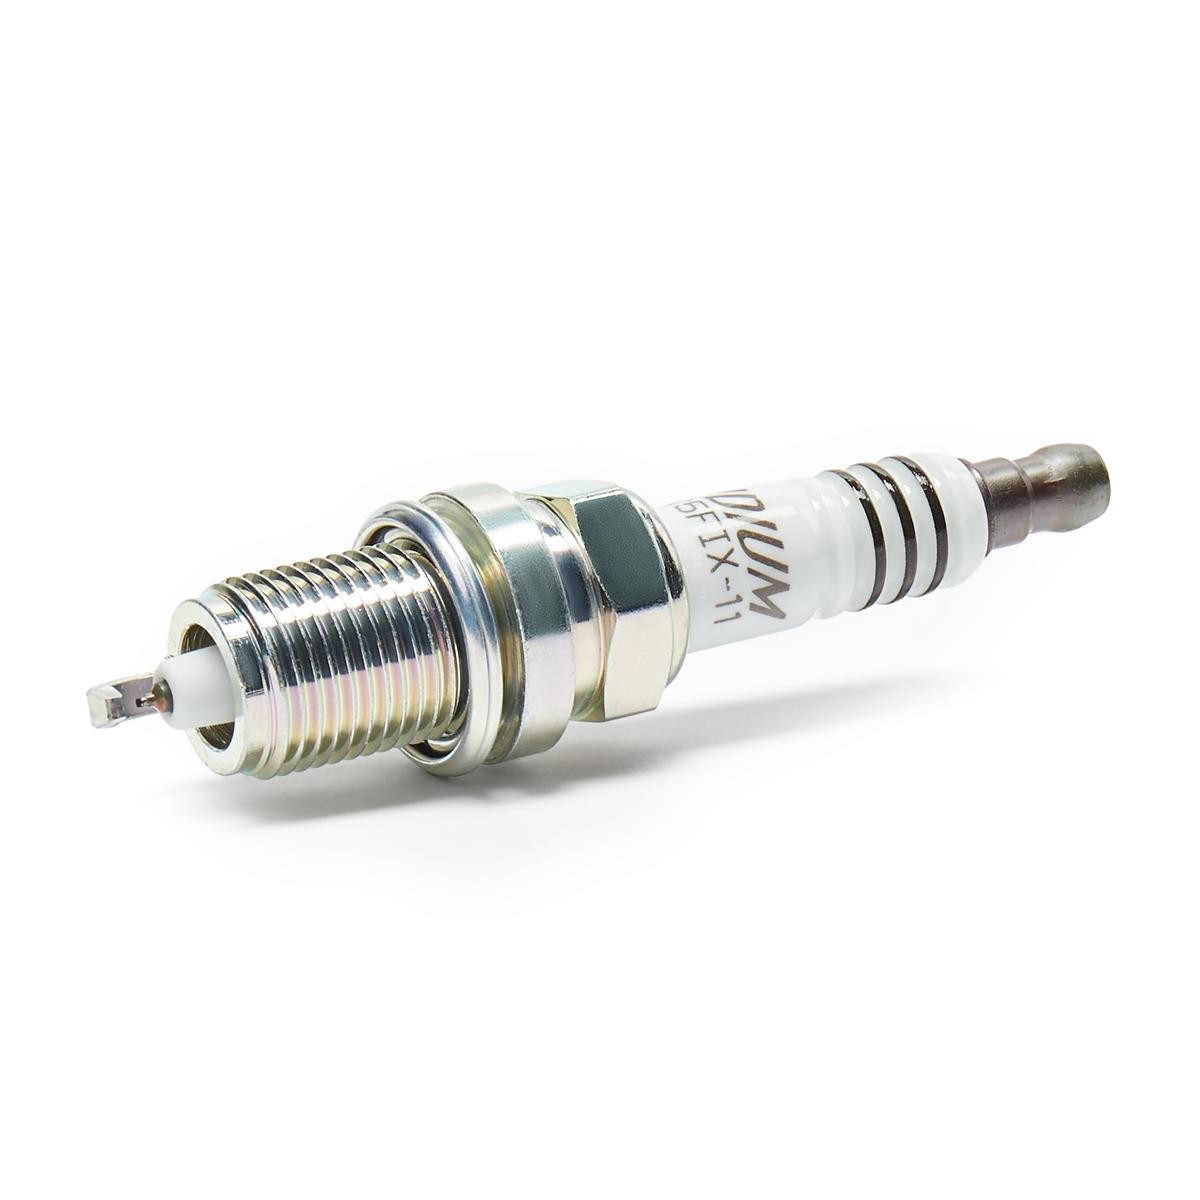 Spark plug 2477 from NGK